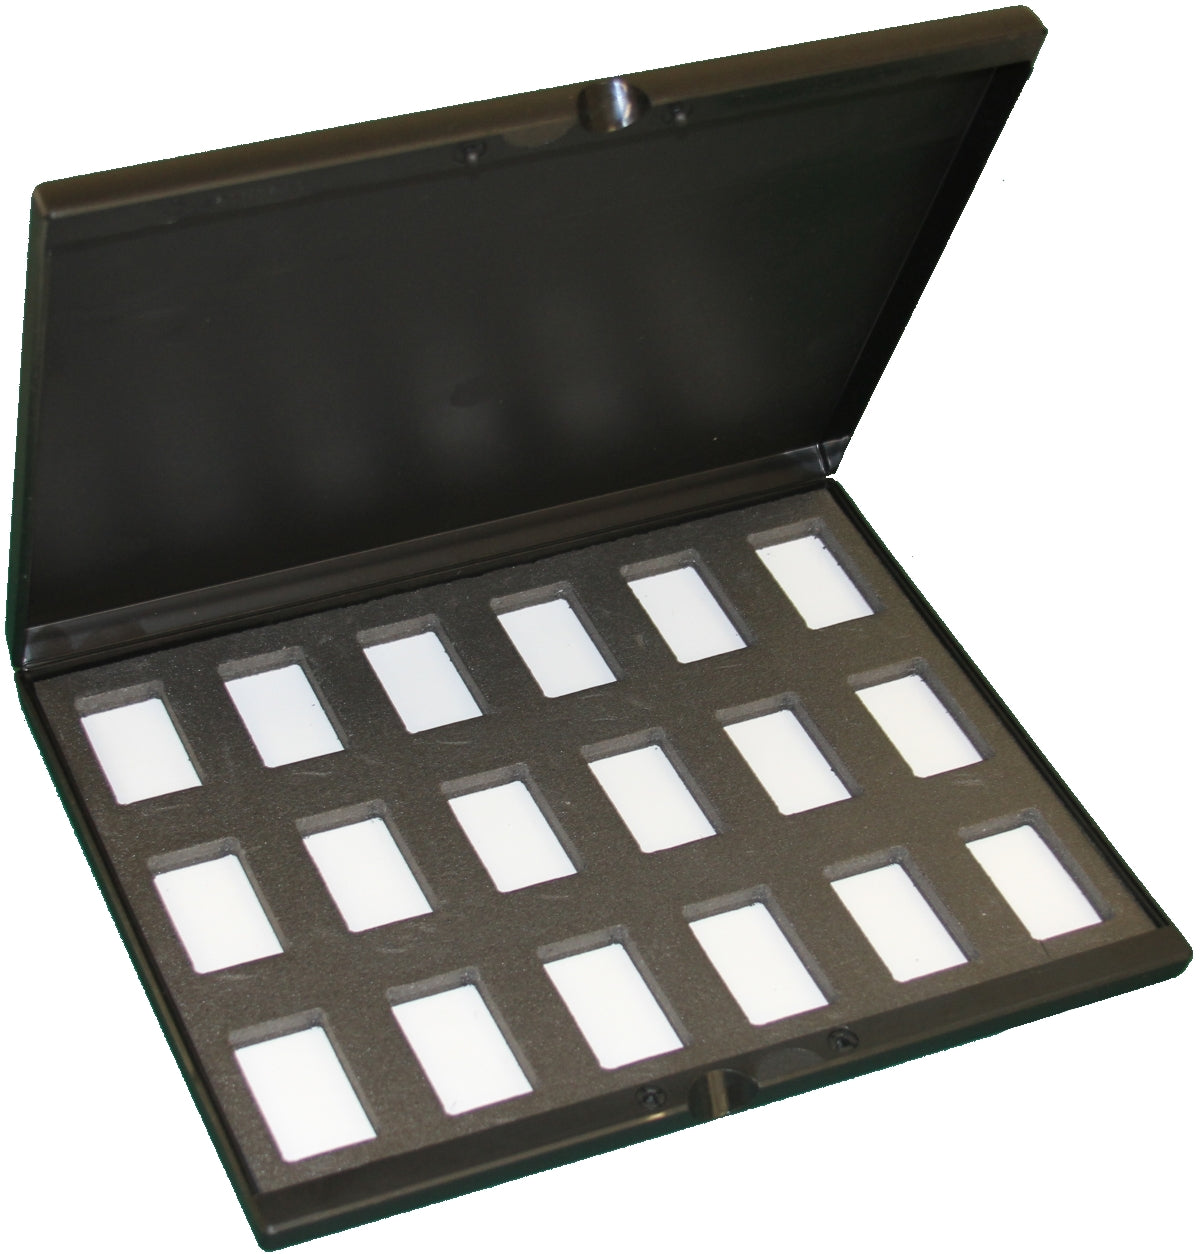 Face Painting Palette Cases & Inserts